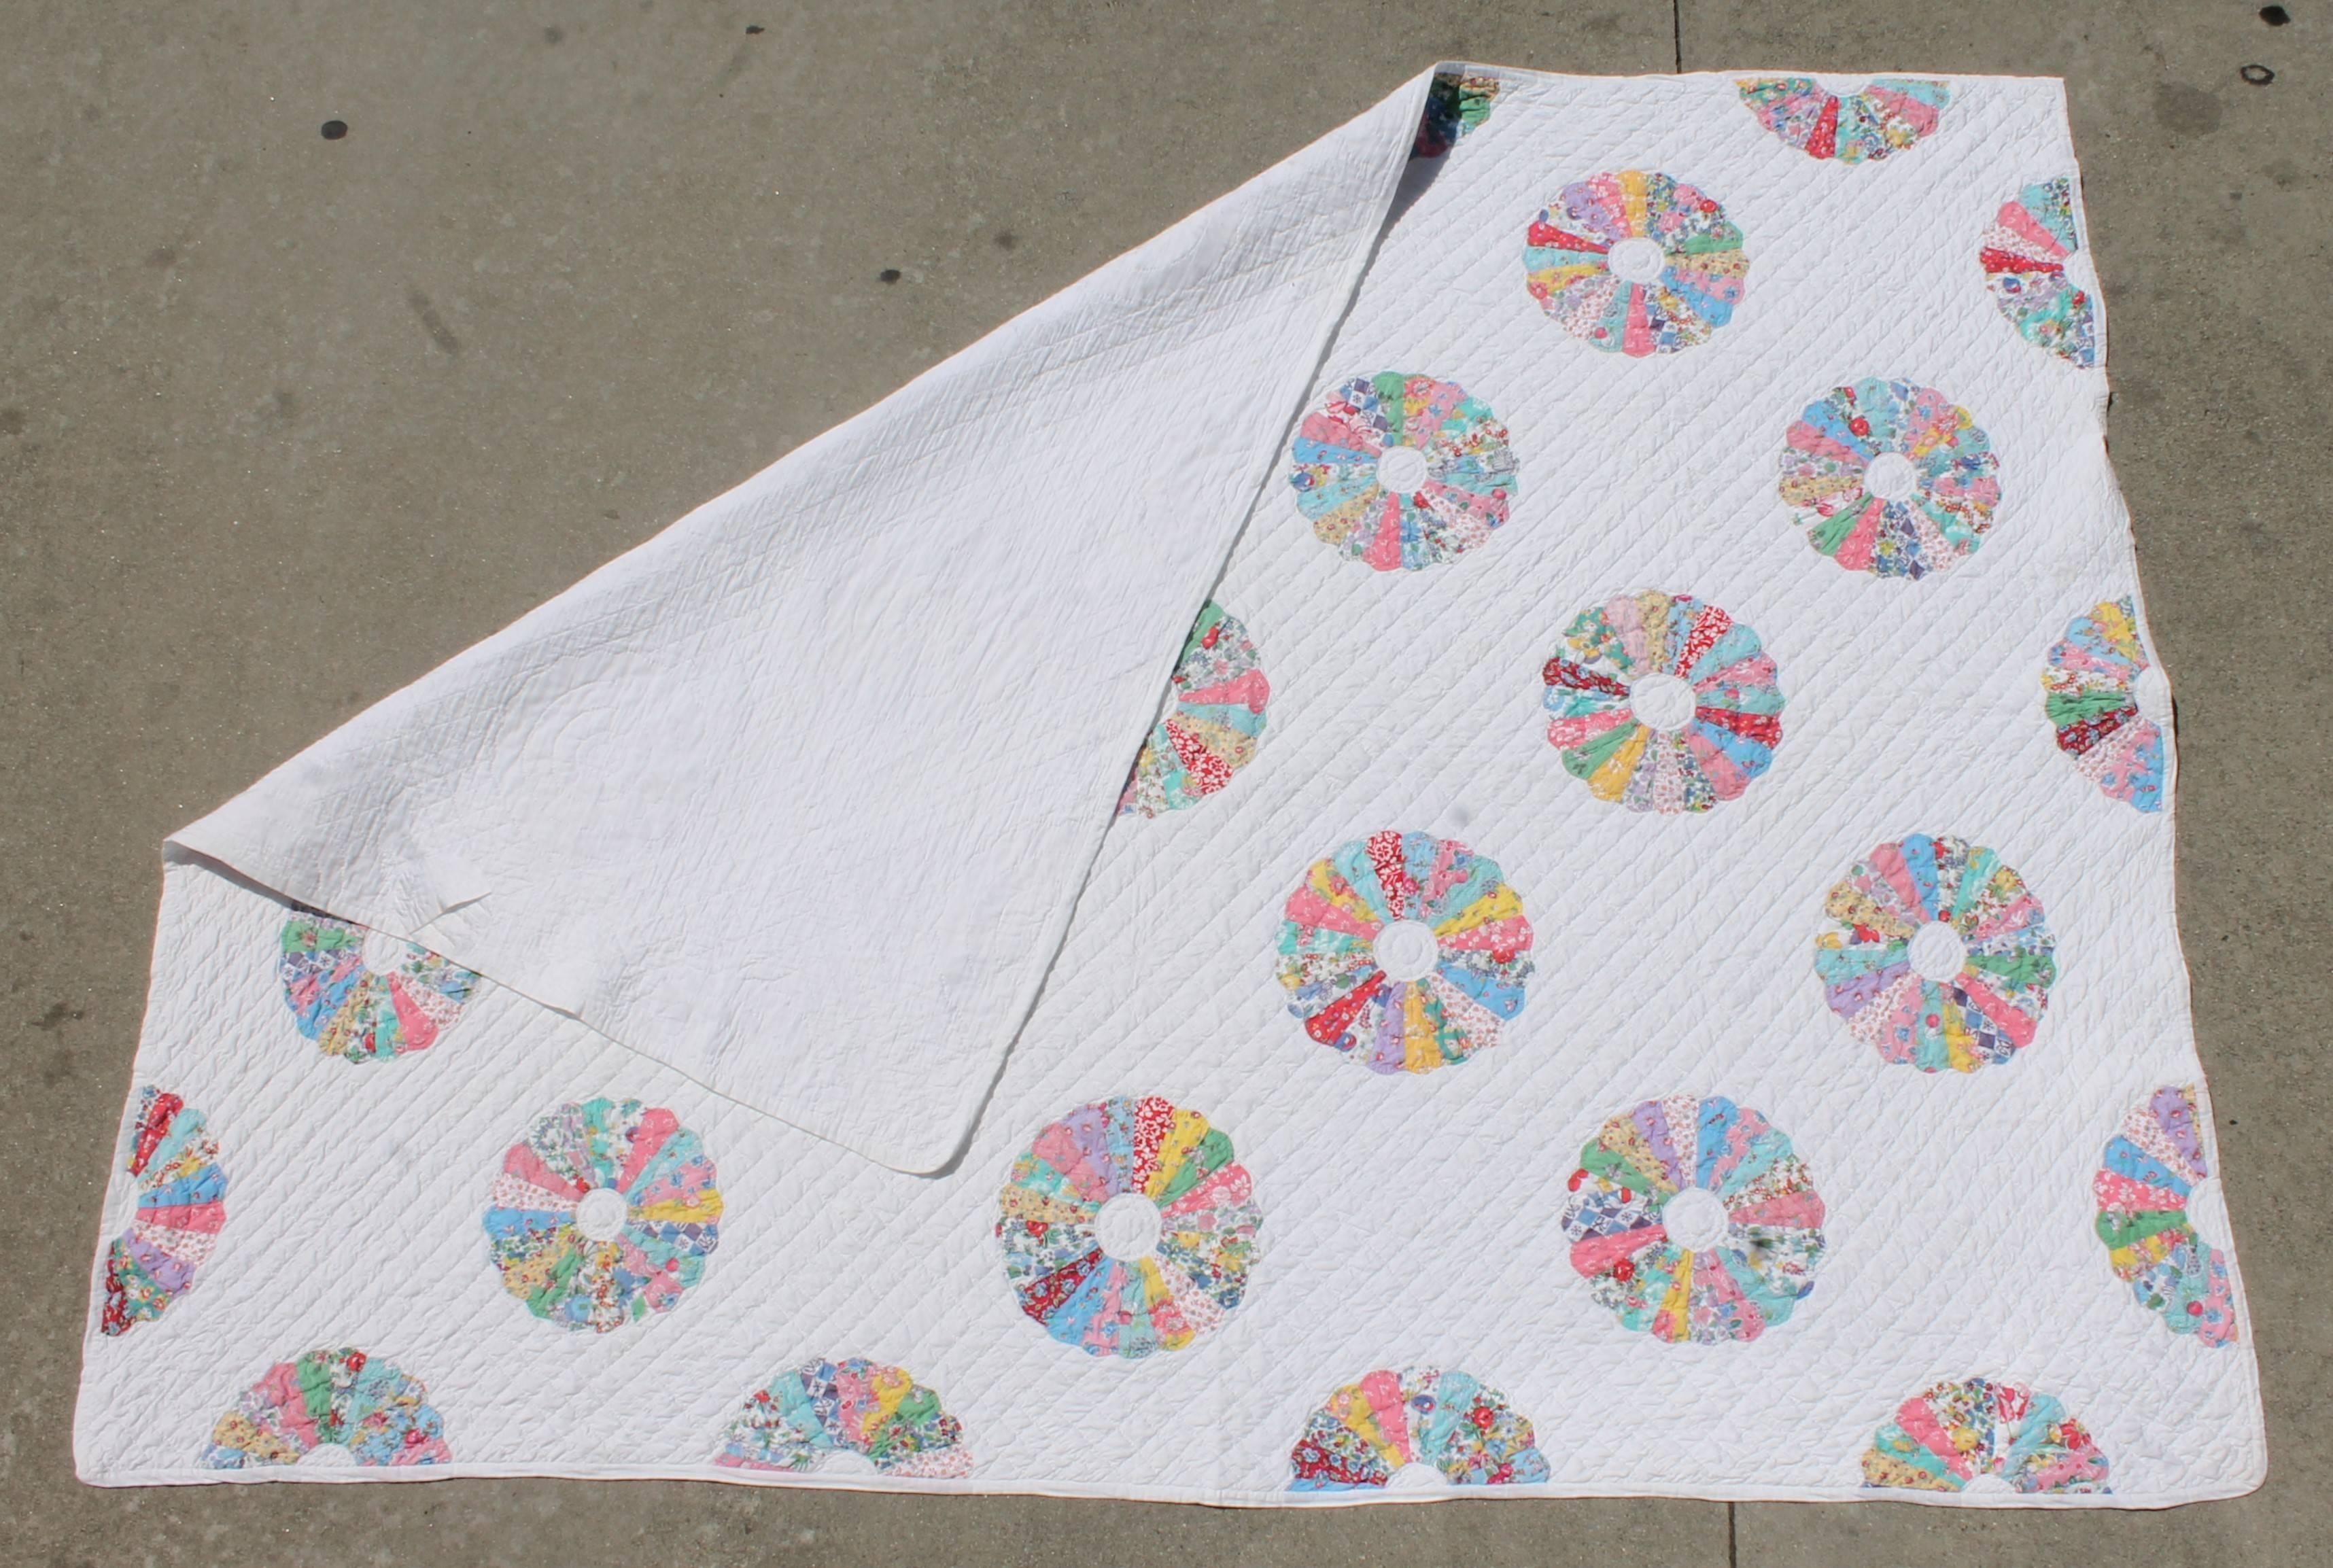 Hand-Crafted Pastel Quilt in Dresden Plate Pattern